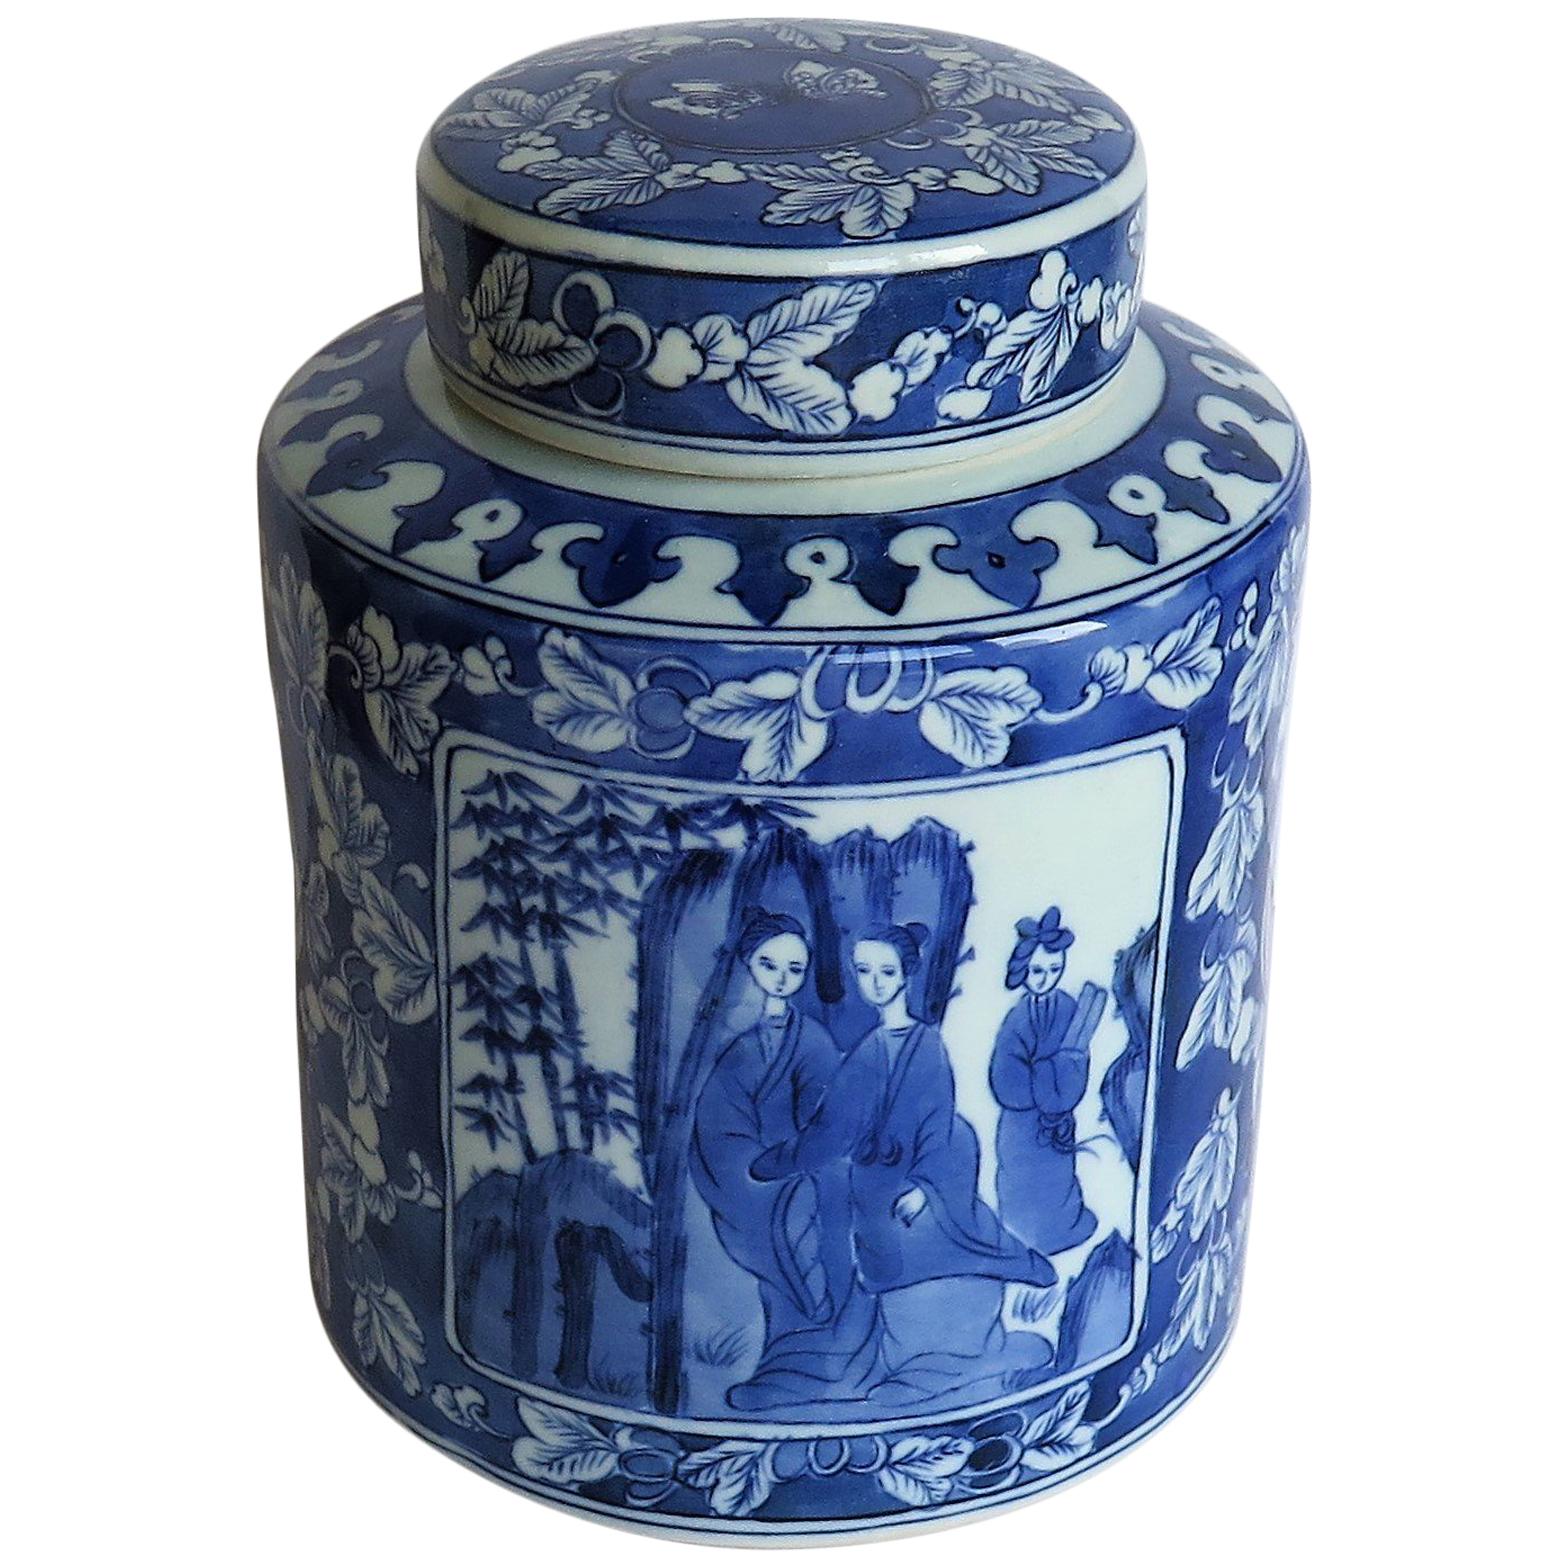 Chinese Export Porcelain Lidded Jar or Pot Blue and White, Hand Painted